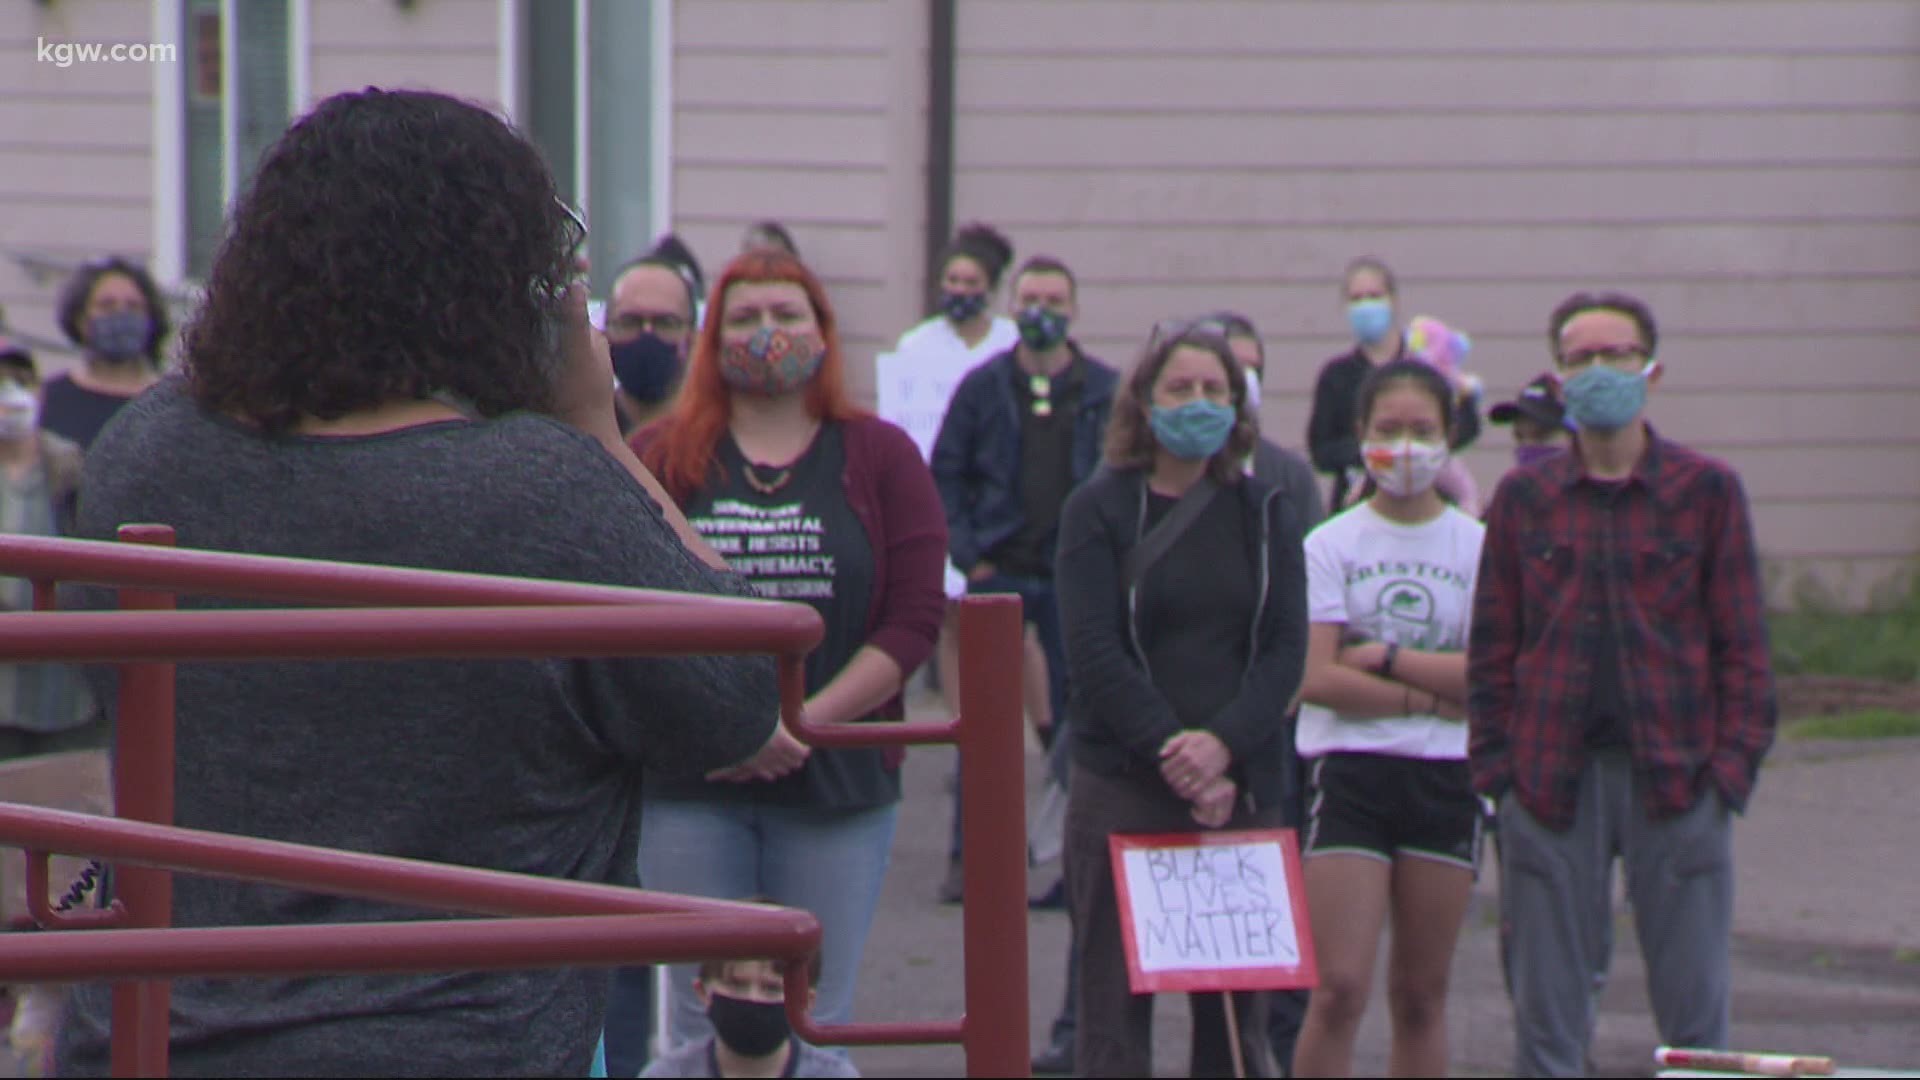 People are demanding changes to policing and calling for the removal of symbols that represent oppression. Portland pastor Dr. Shon Neyland spoke with KGW about it.